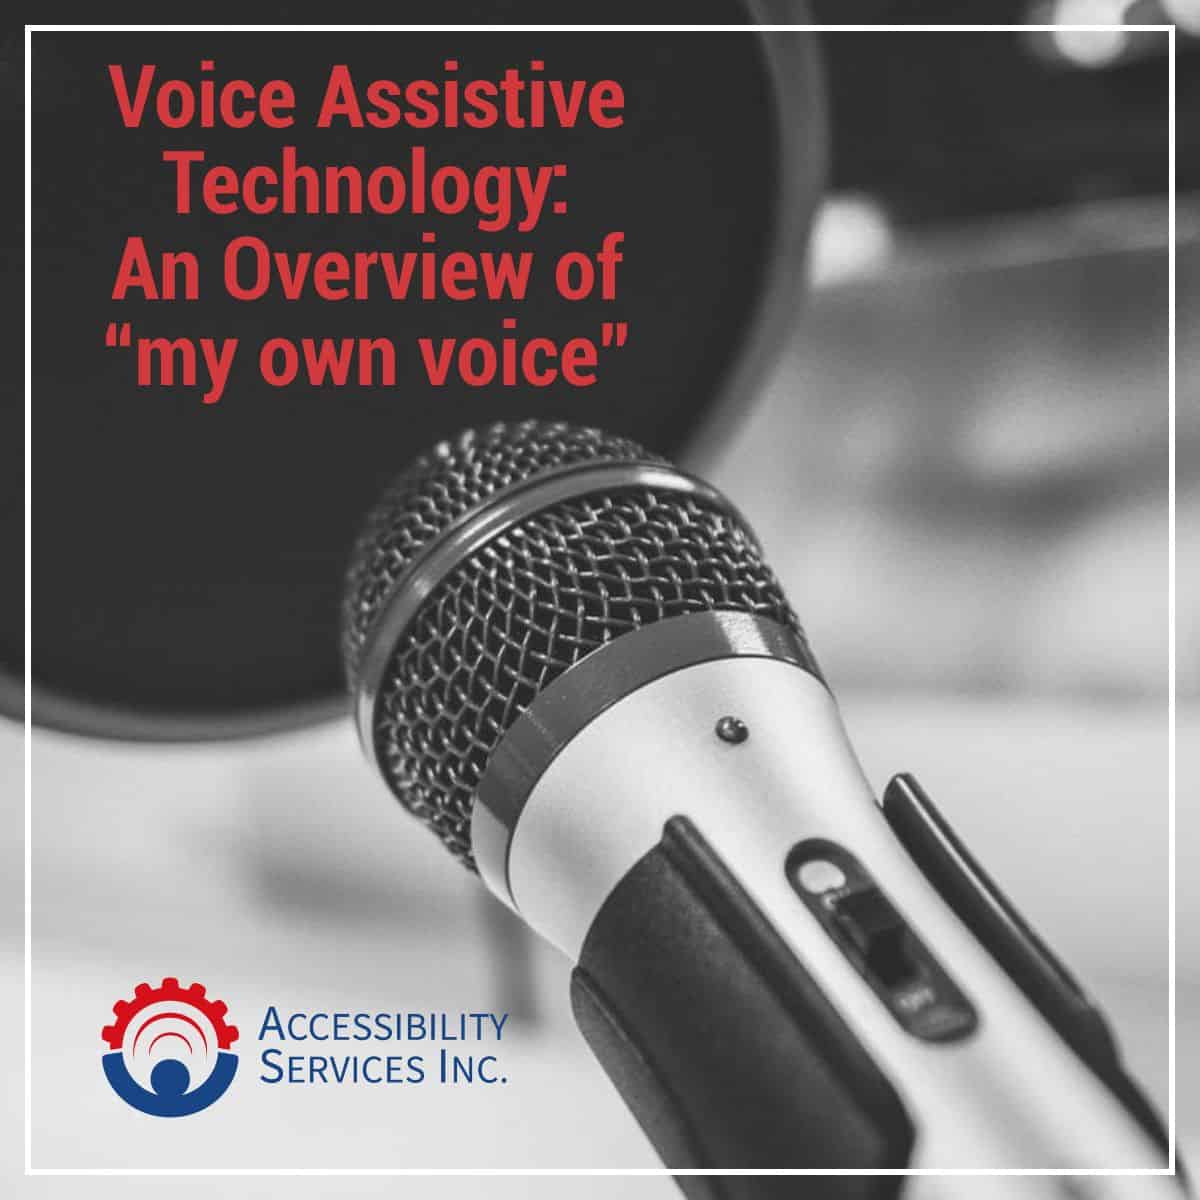 Voice Assistive Technology: An Overview of “my own voice” Software